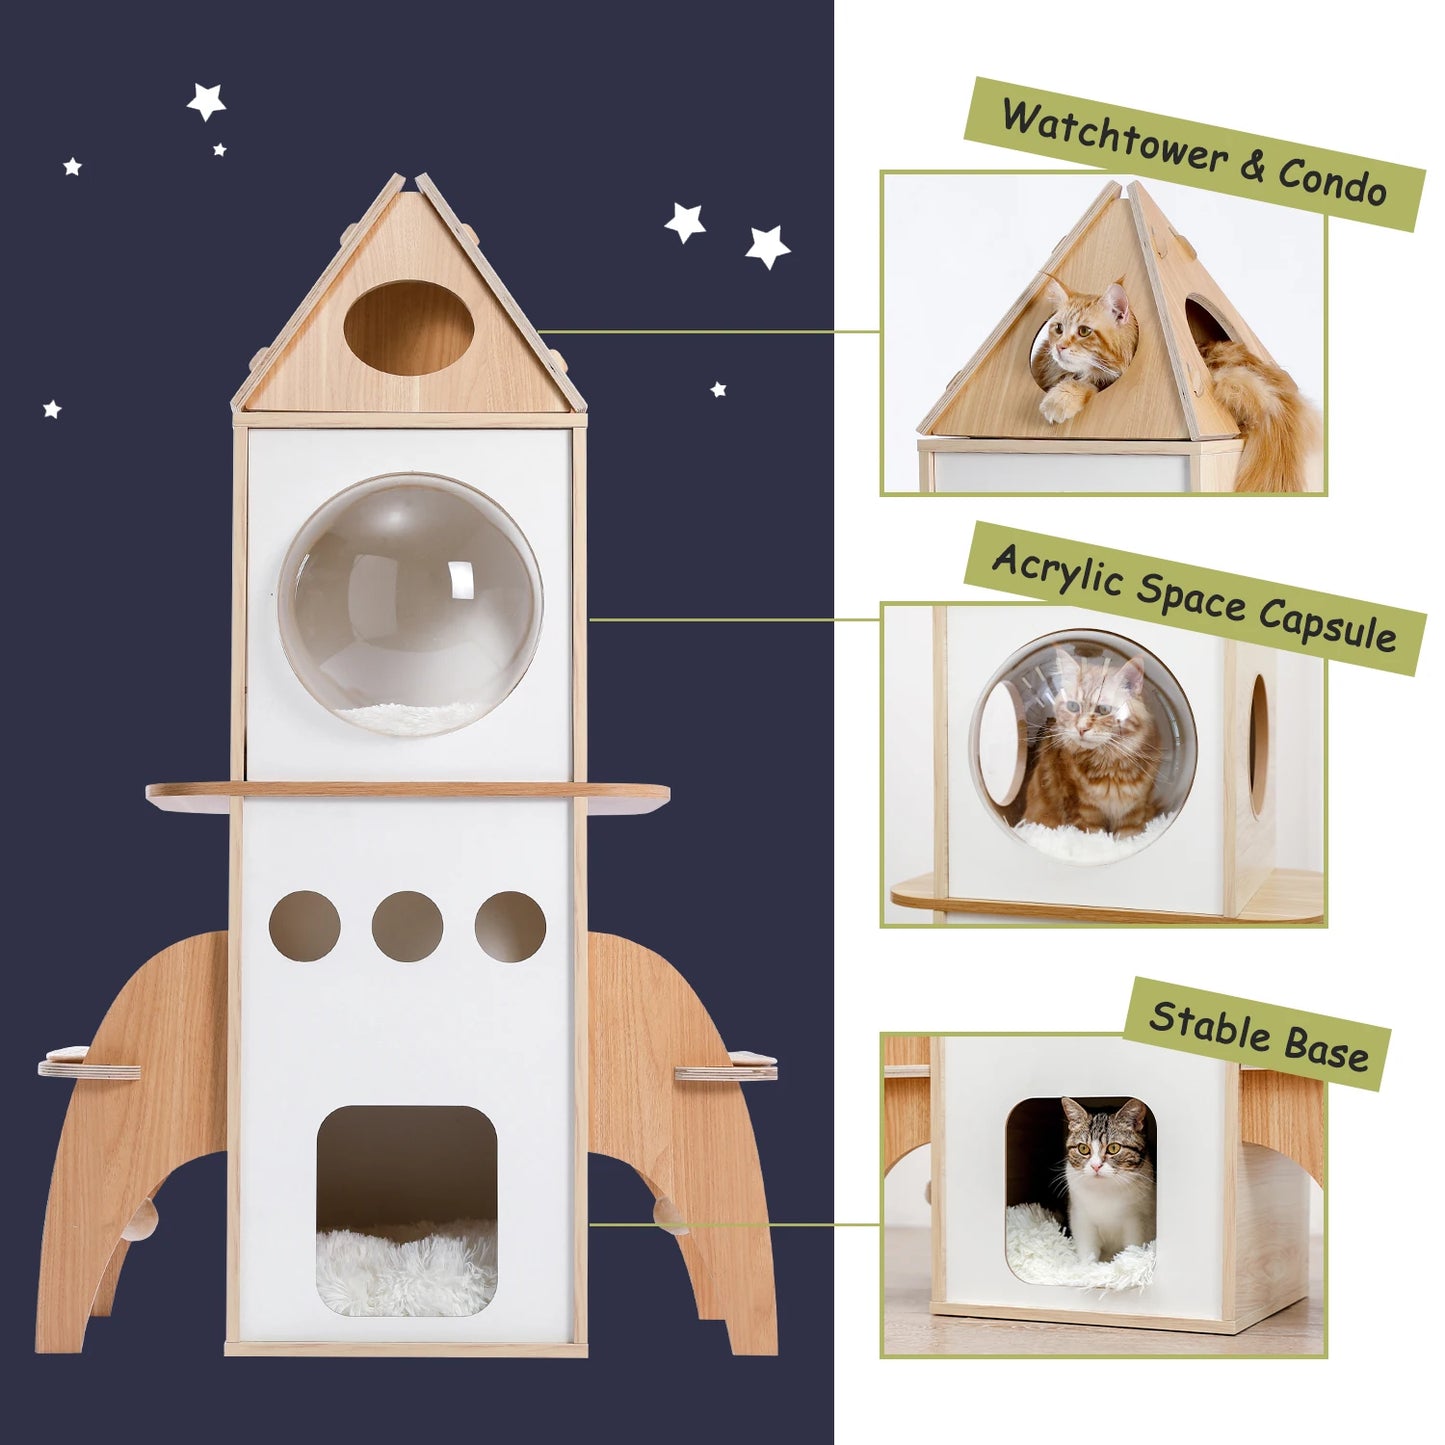 137cm Wooden Rocket Cat Tree with Sisal Scratching Posts and Cozy Condos